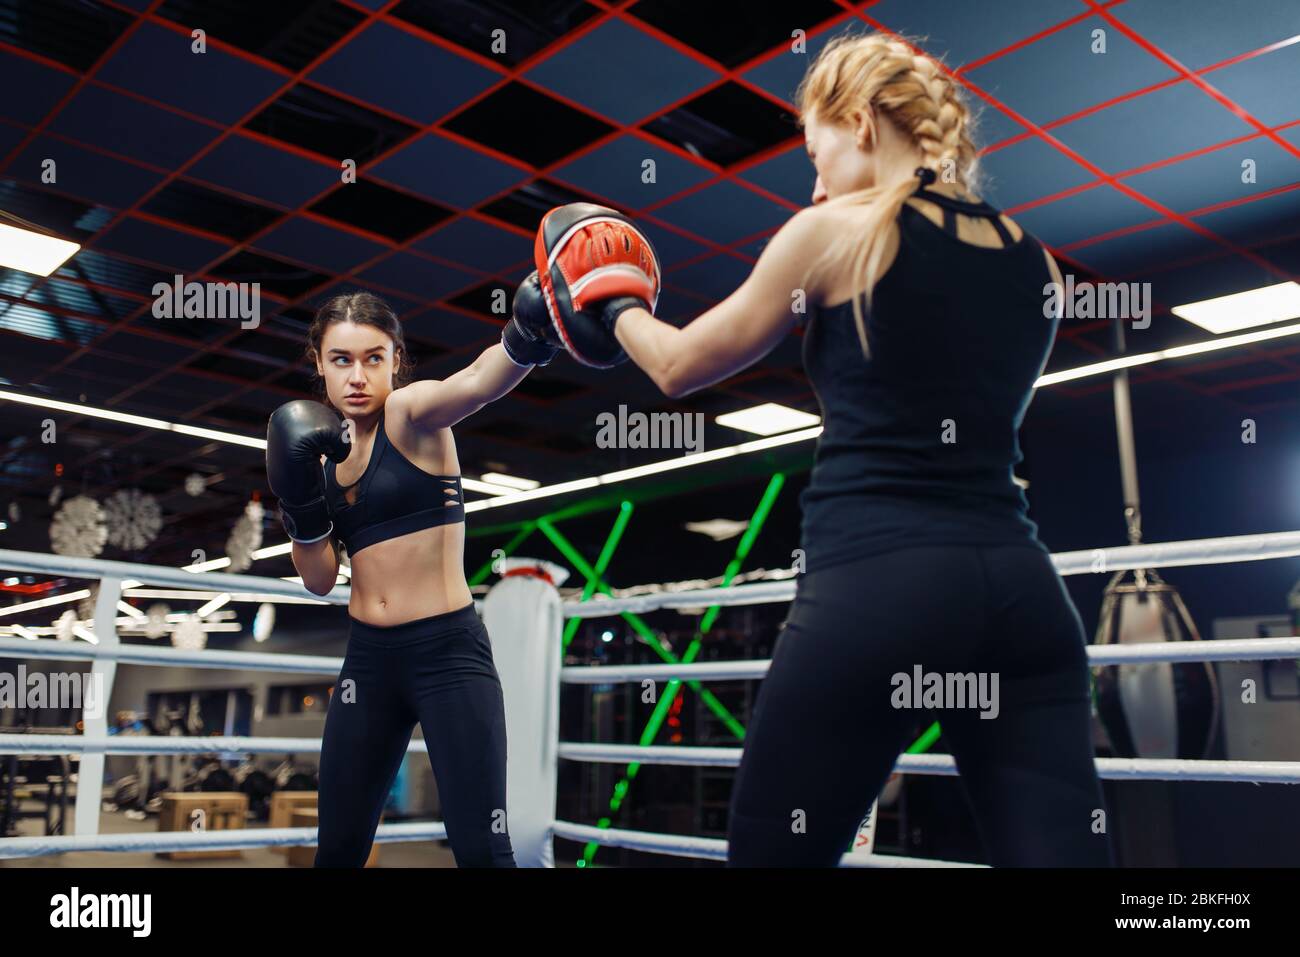 Two women boxing in the ring, box training Stock Photo